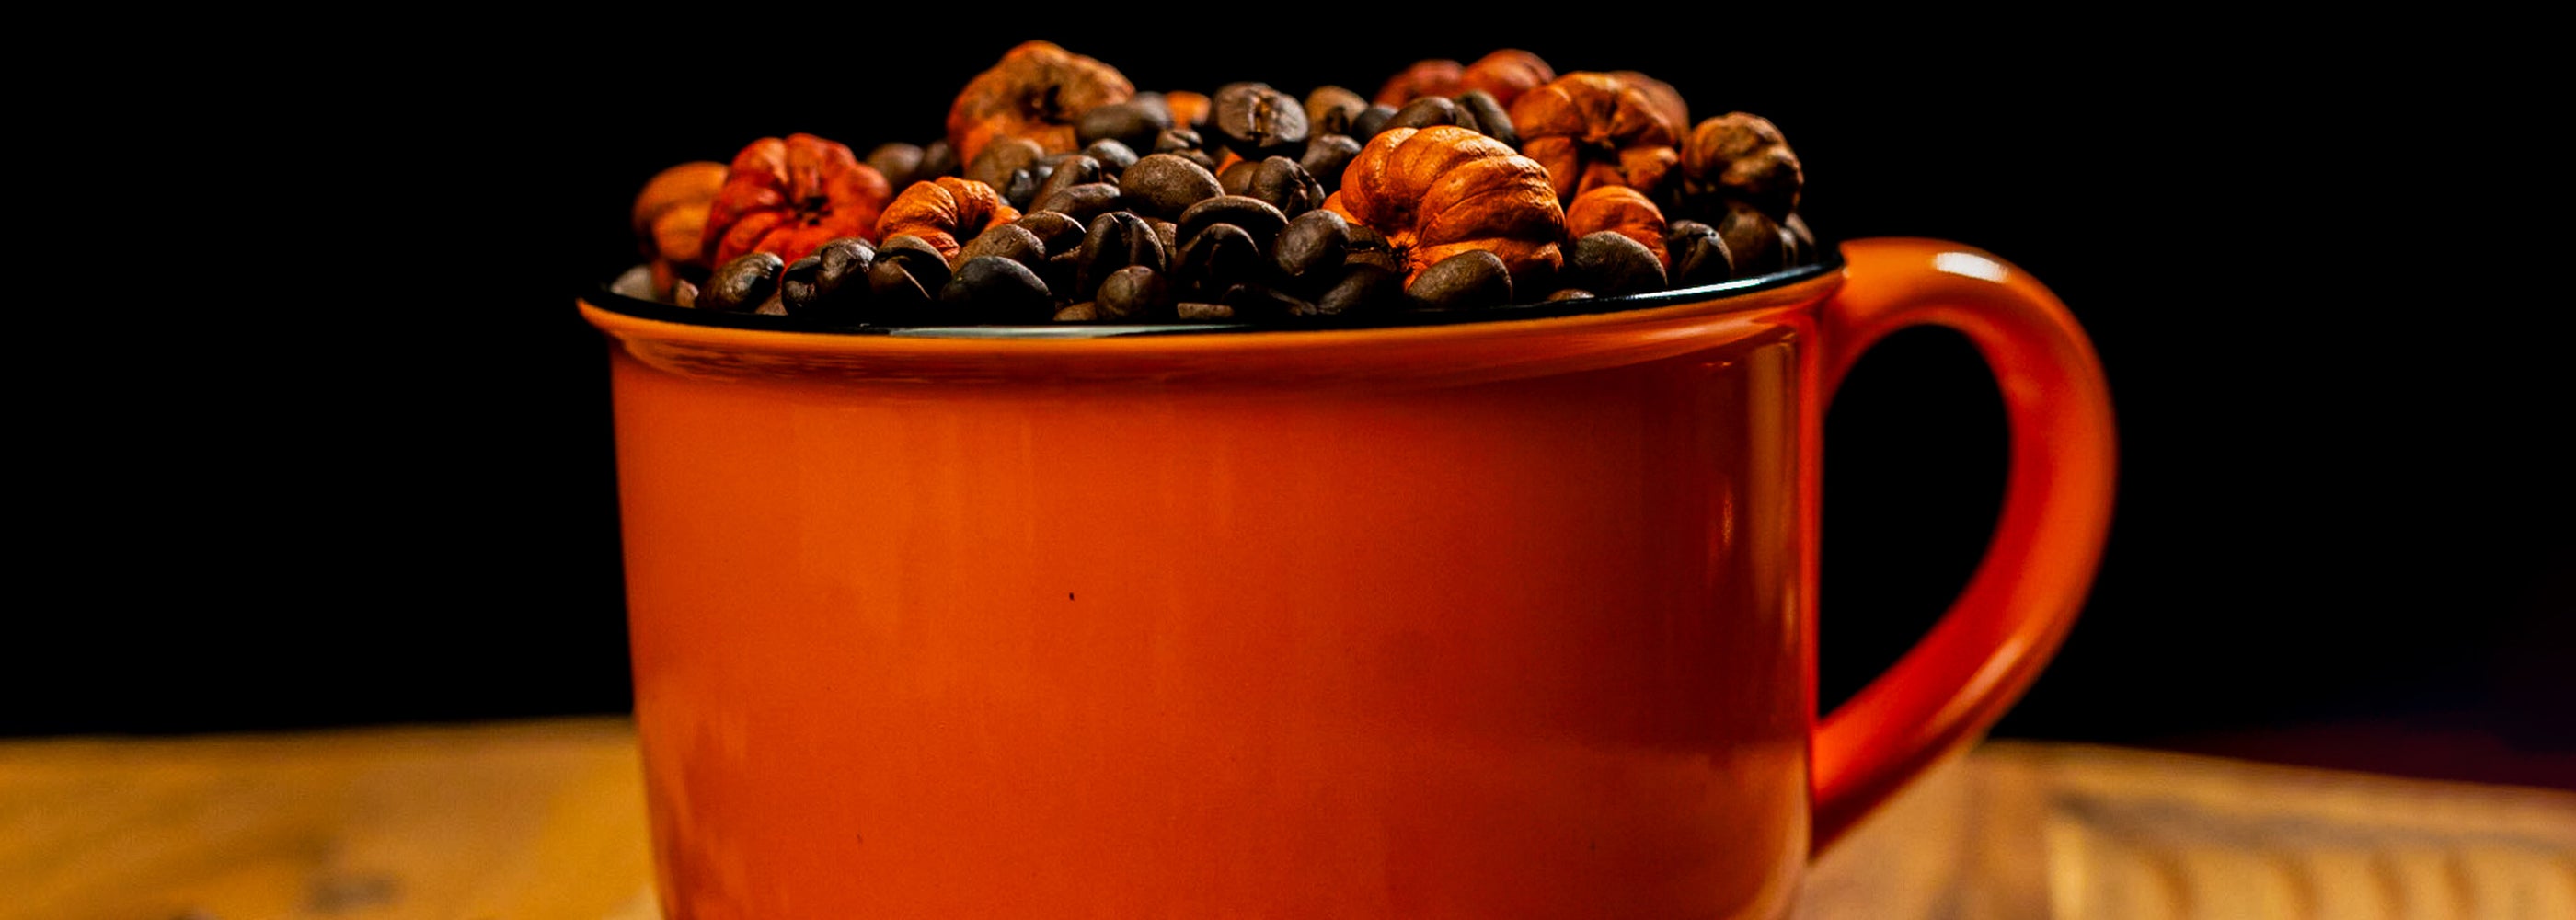 A full cup of coffee kingz beans with some beans spilling over the brim, against a dark background.